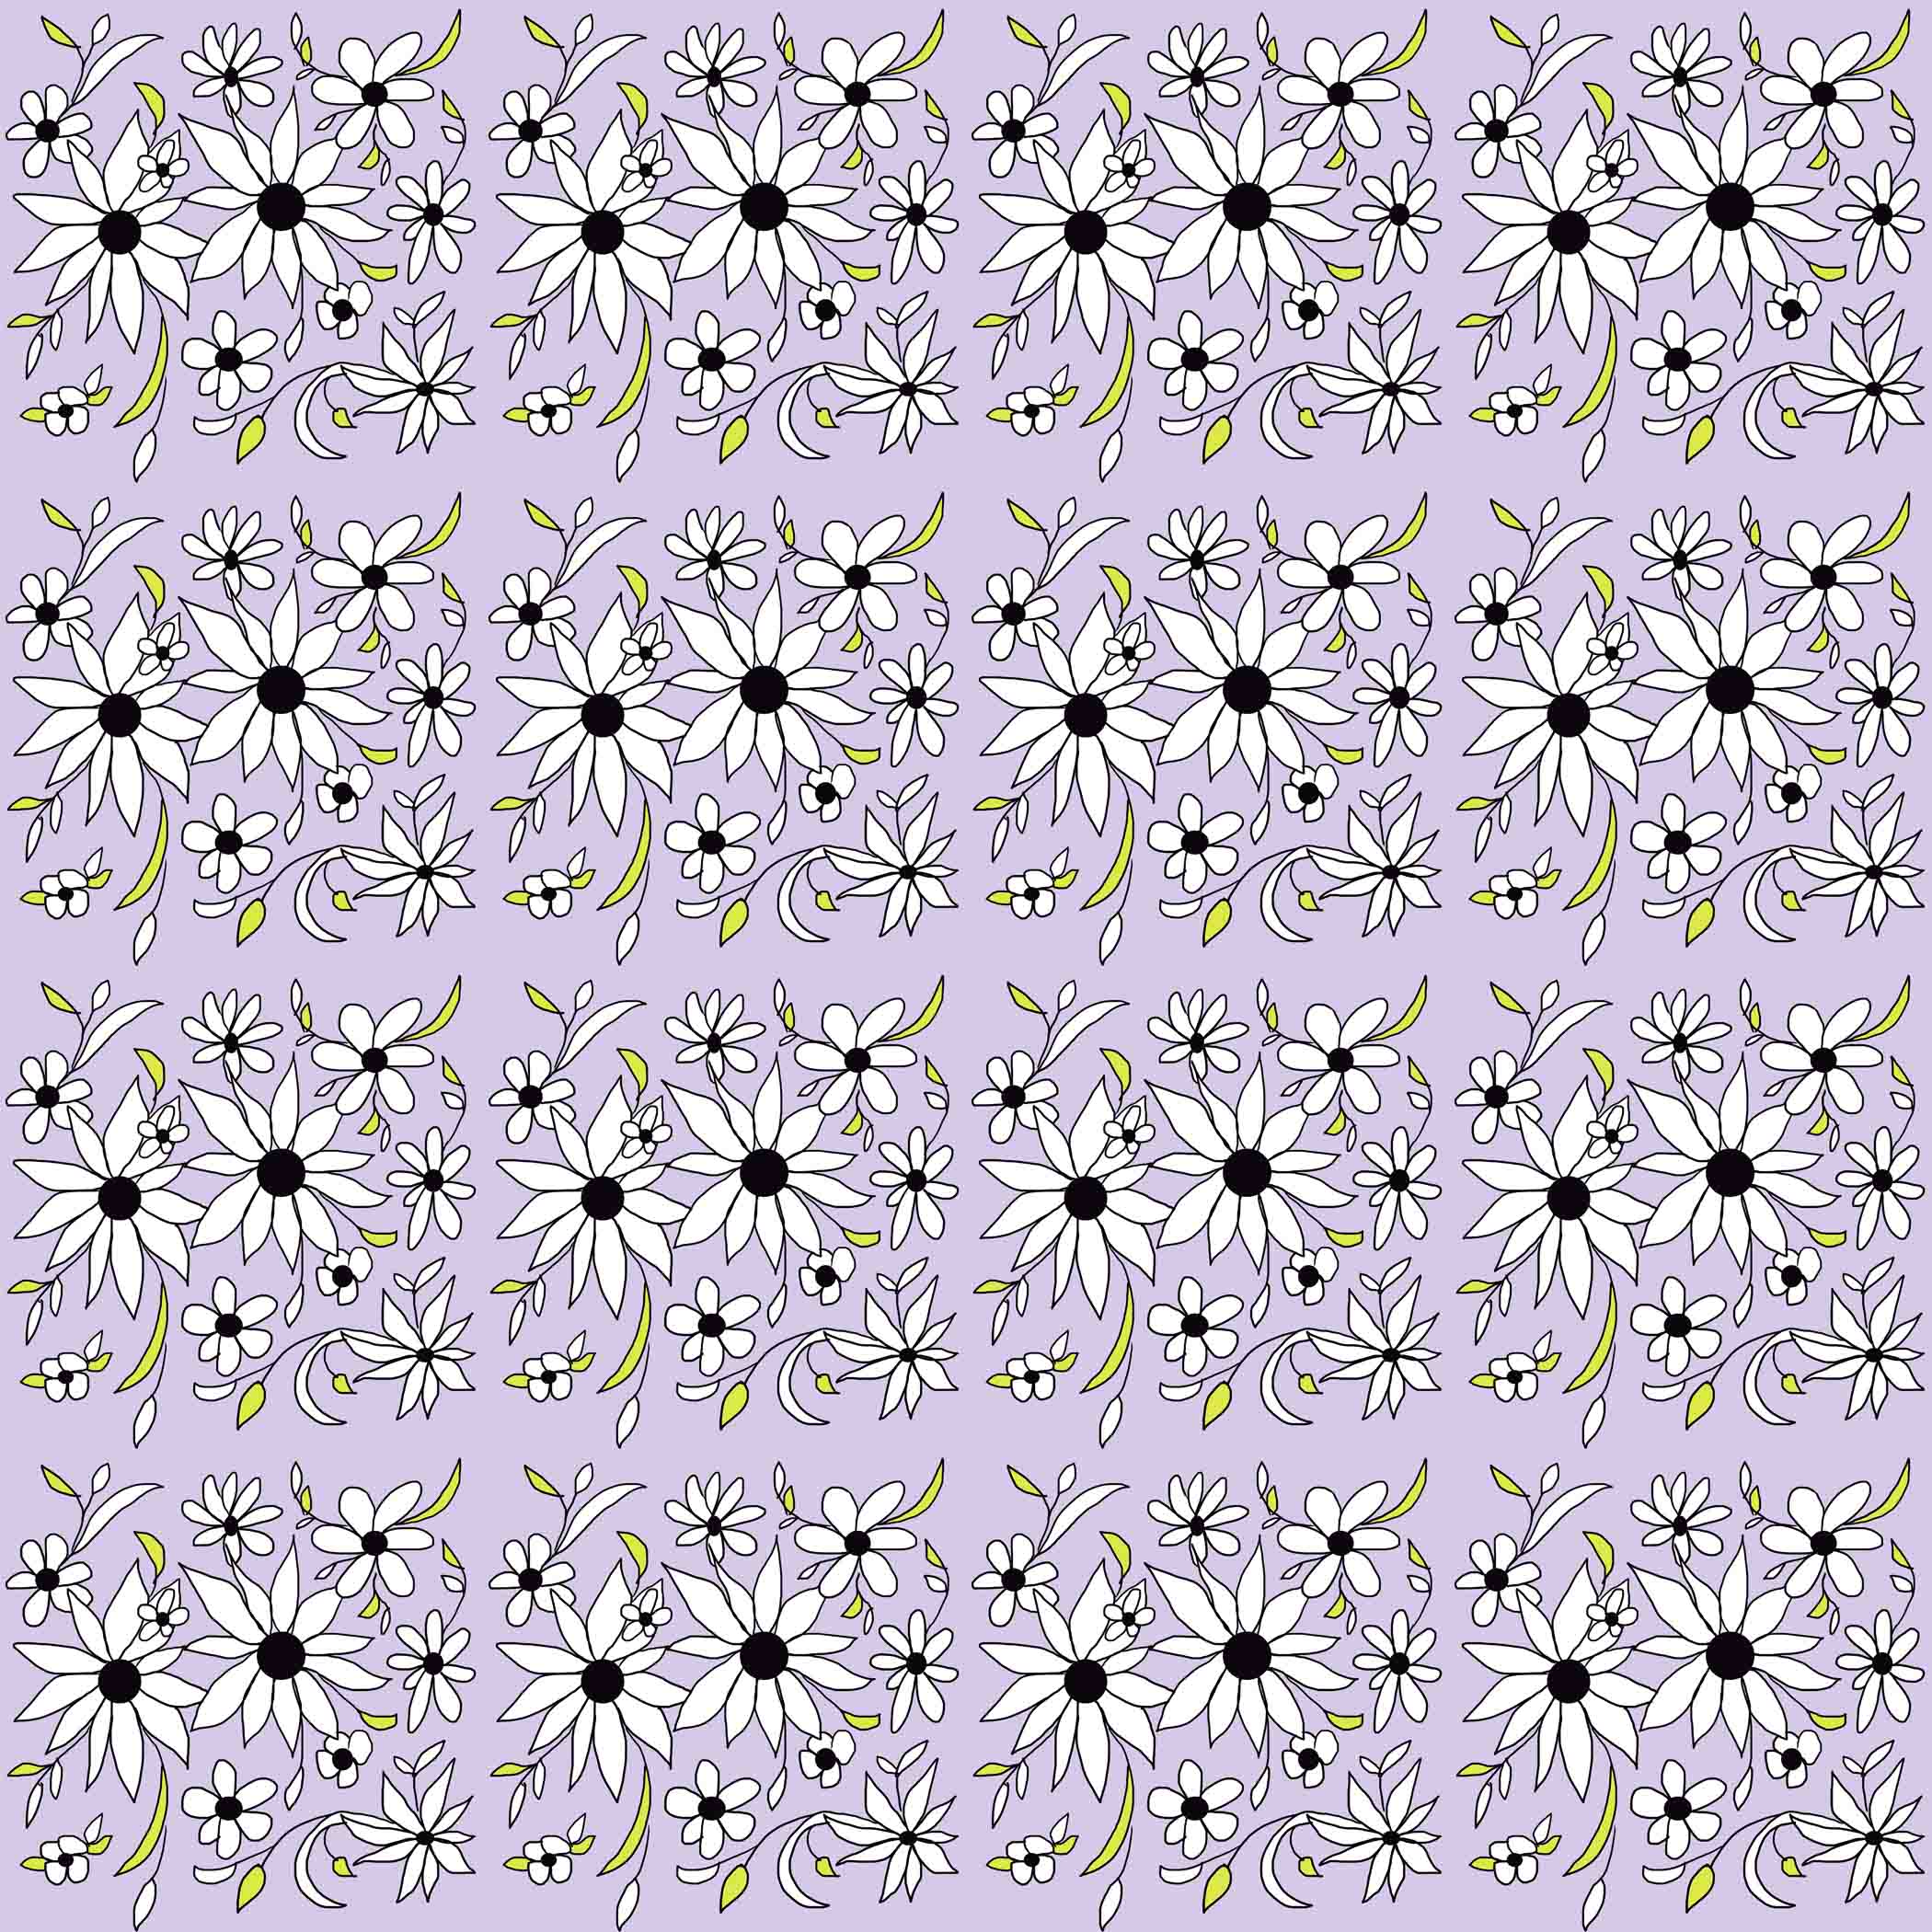 art every day number 599 a thousand flowers plus one garden spring purple